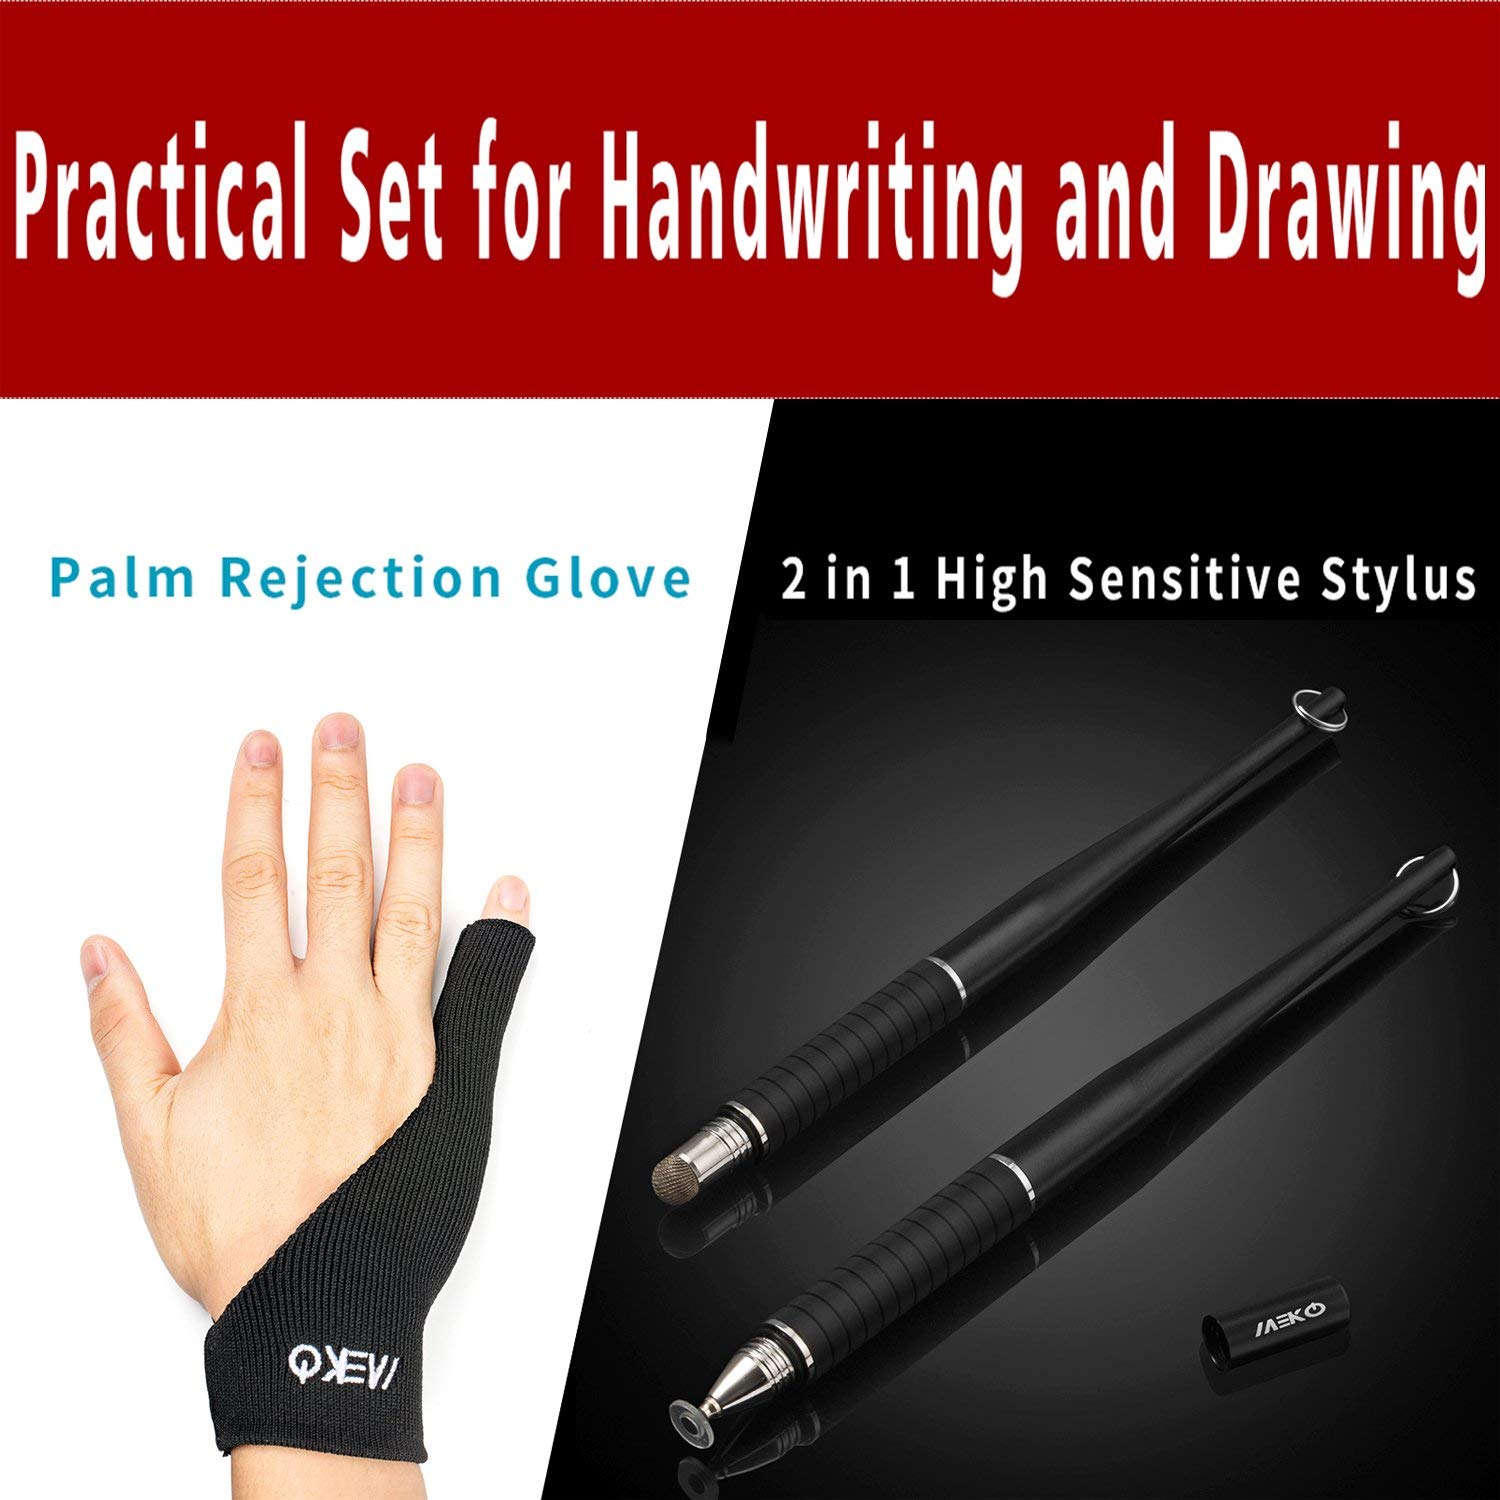 Stylus Pens with Anti-fouling Palm Rejection Artist Glove